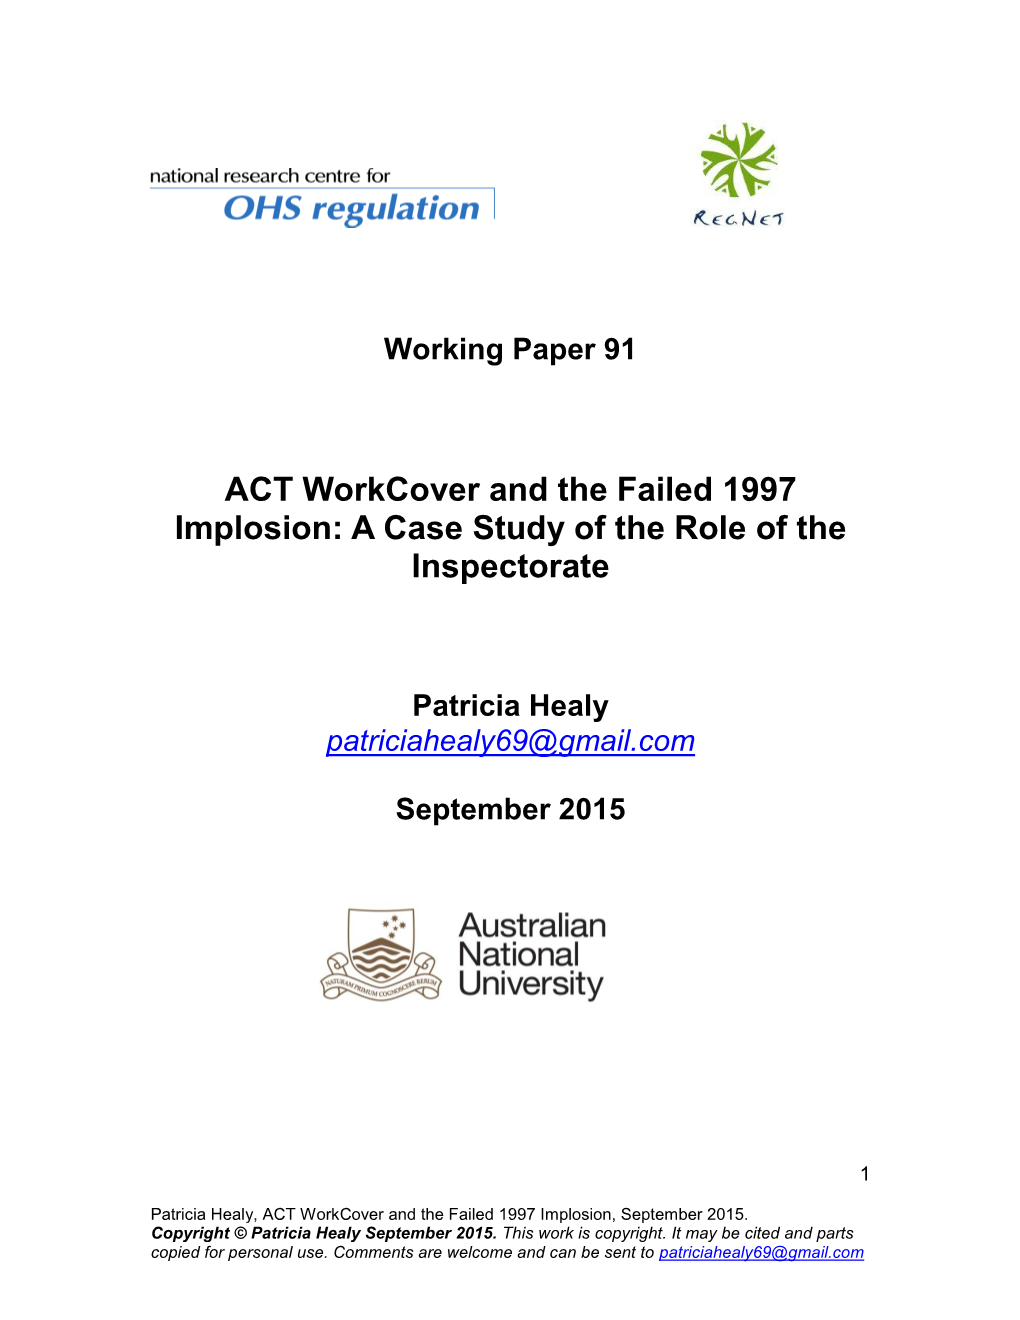 ACT Workcover and the Failed 1997 Implosion: a Case Study of the Role of the Inspectorate